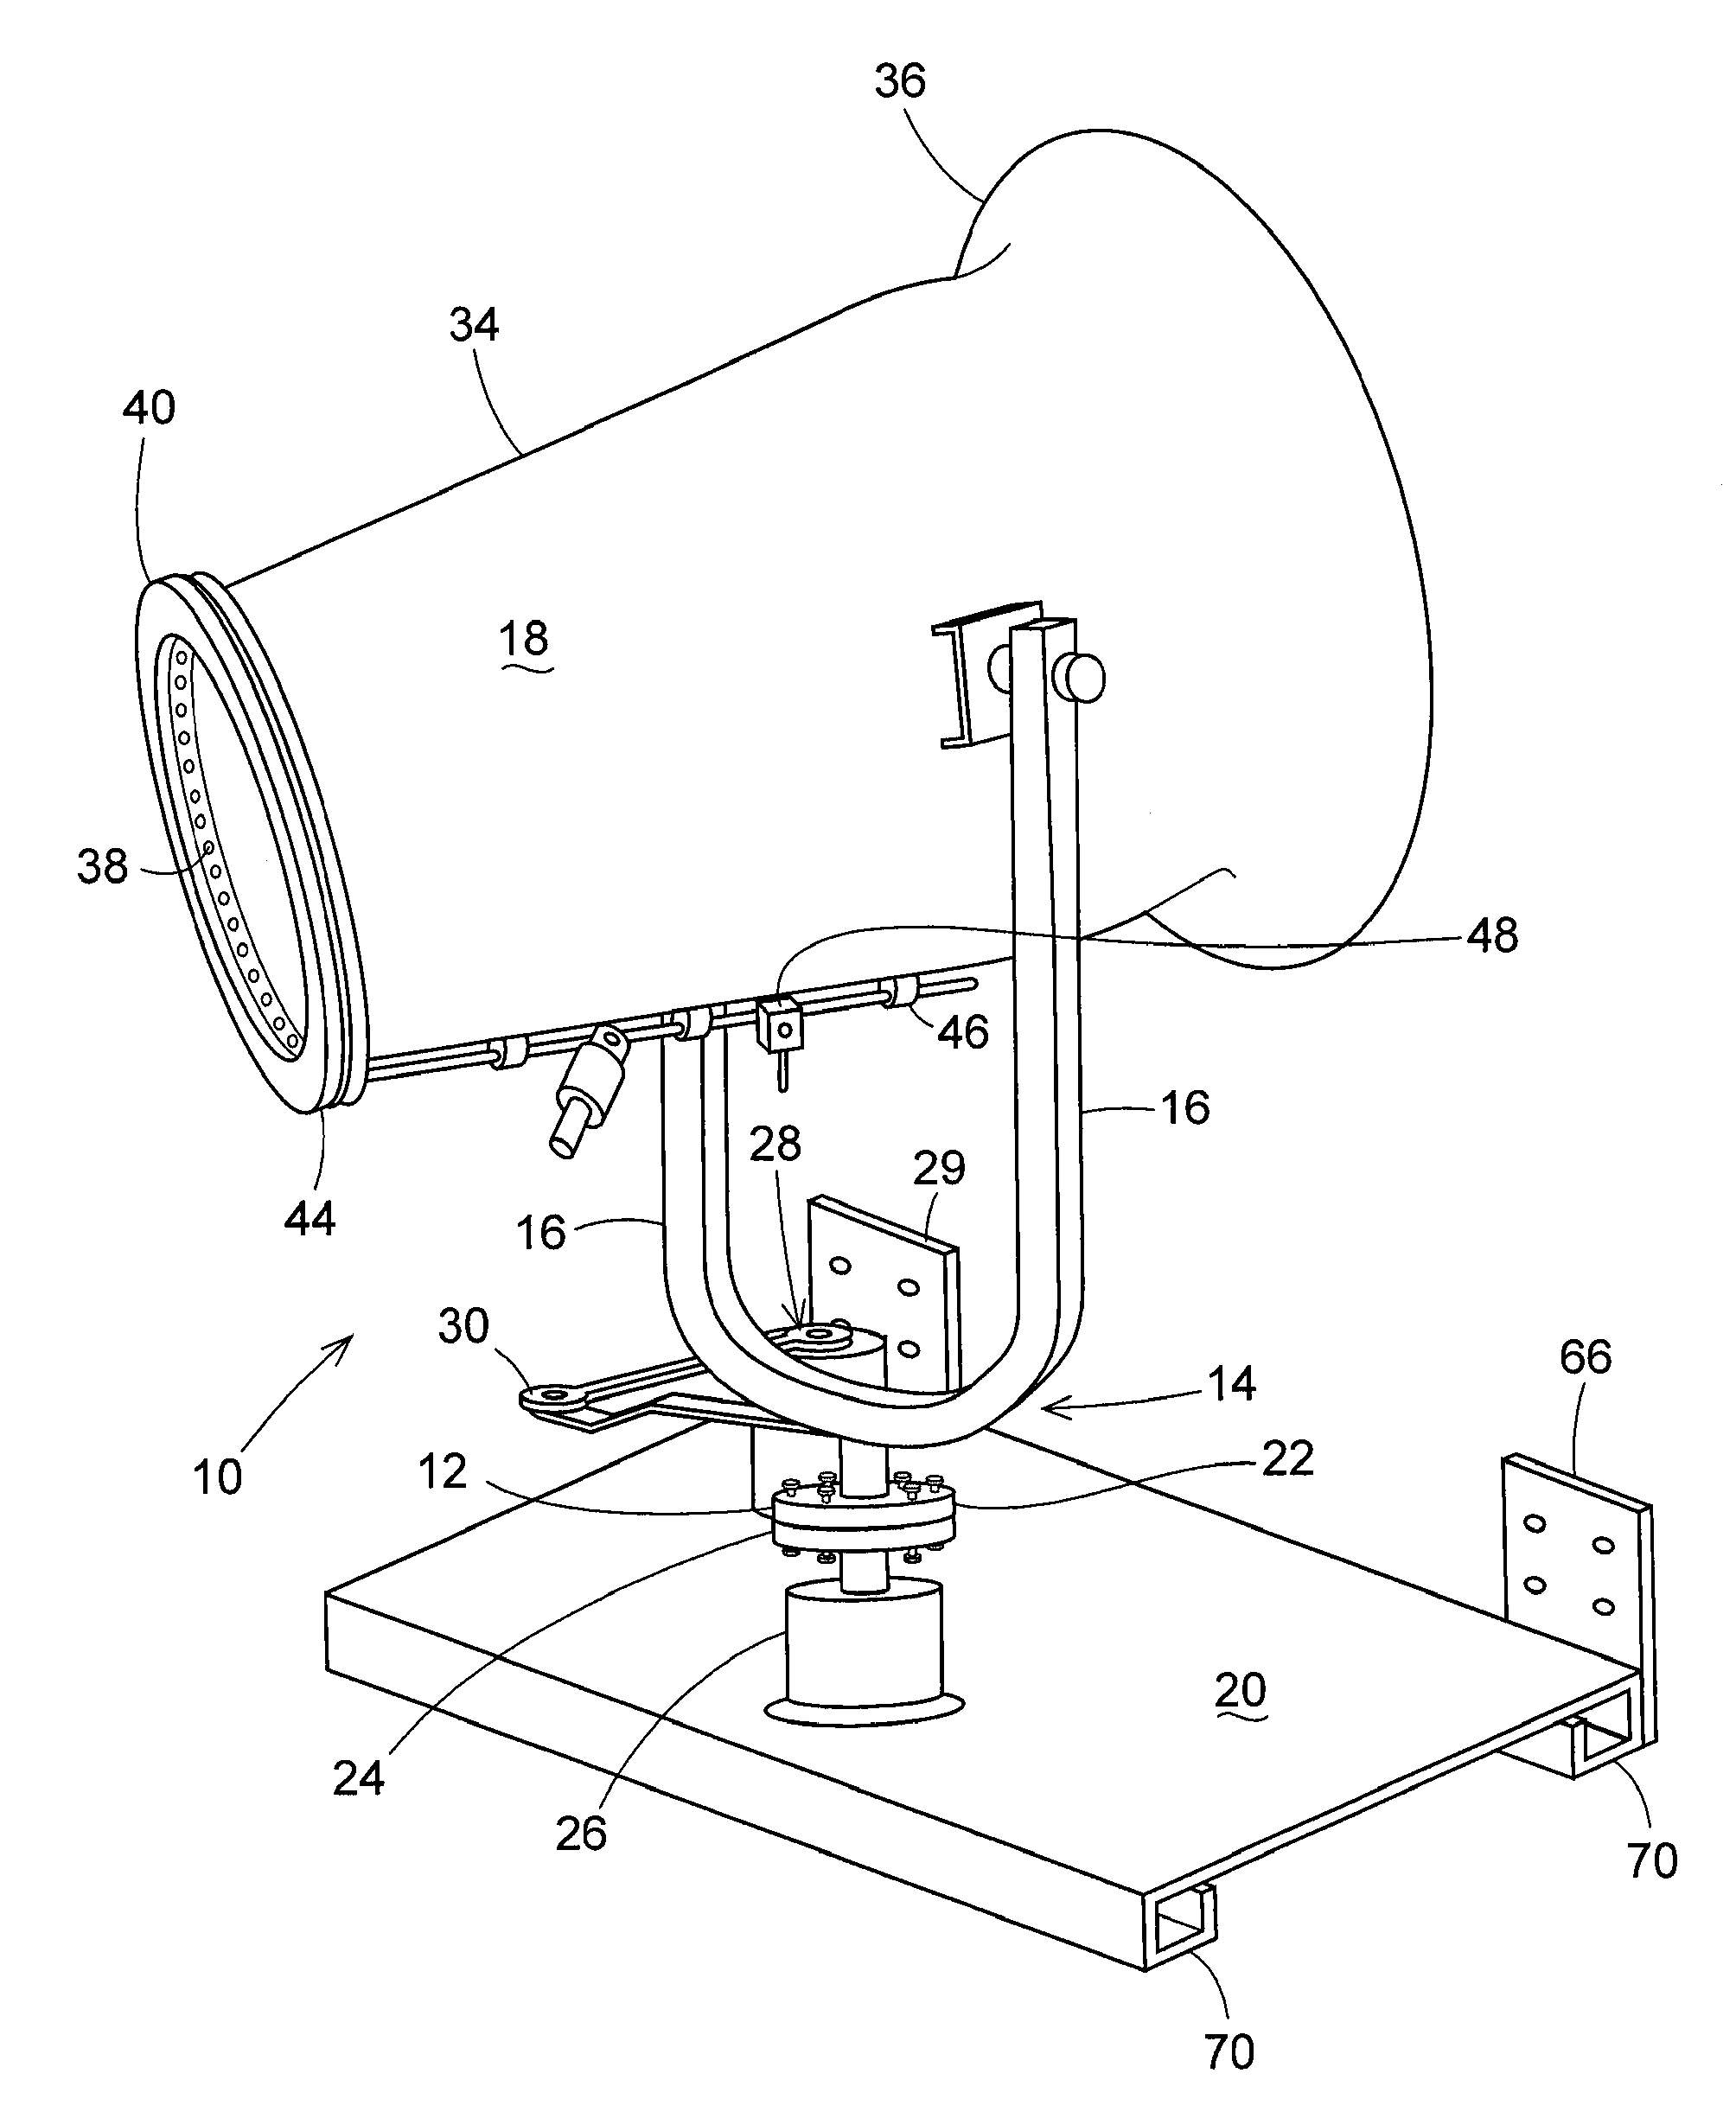 Method for Attaching a Blower Unit to Industrial Equipment and Apparatus Used Therewith and Methods for Using the Same